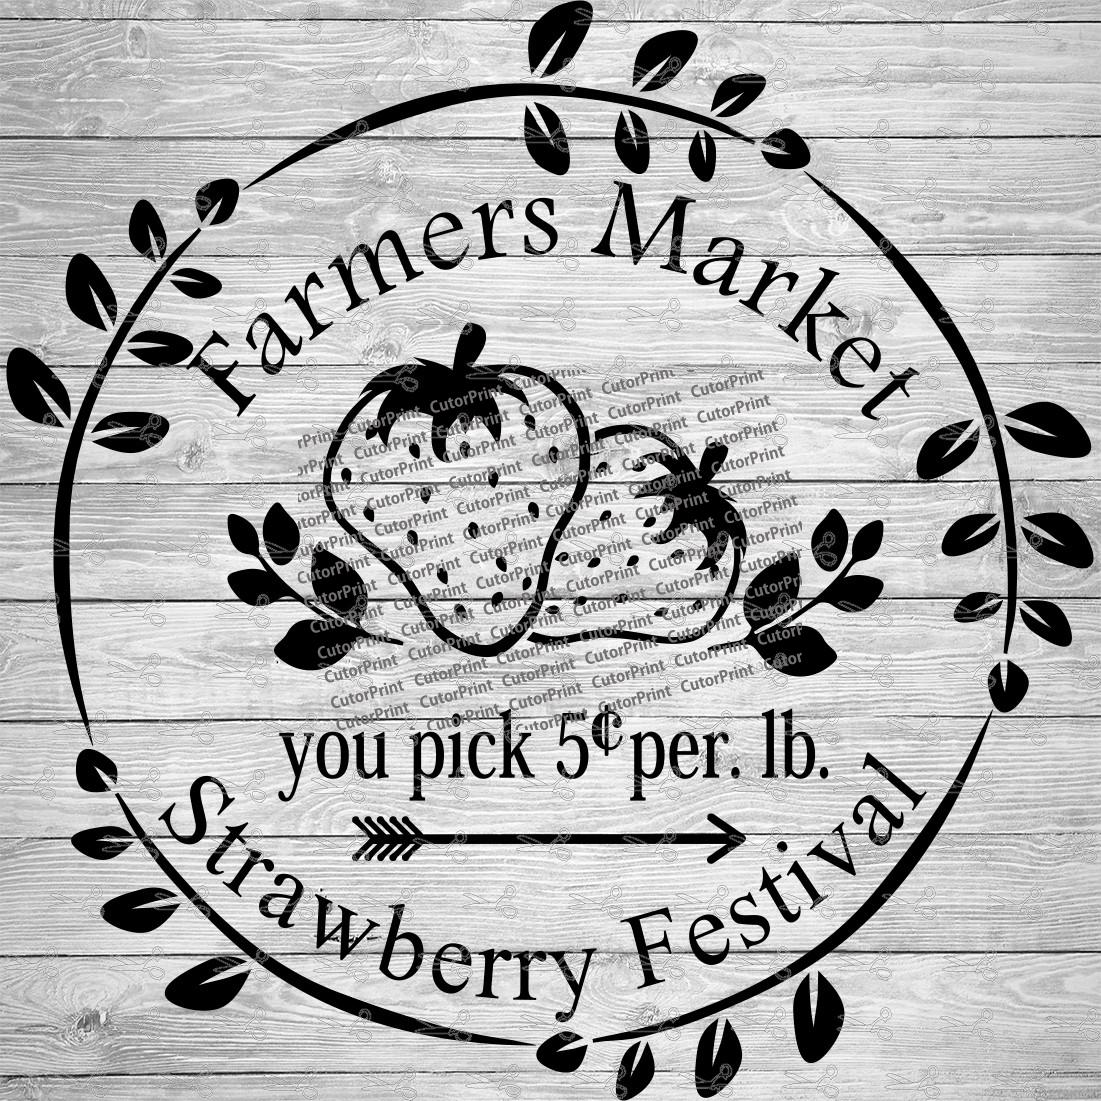 Download Strawberry Festival Sign Svg Eps Png Files Digital Download Files For Cricut Silhouette Cameo And More